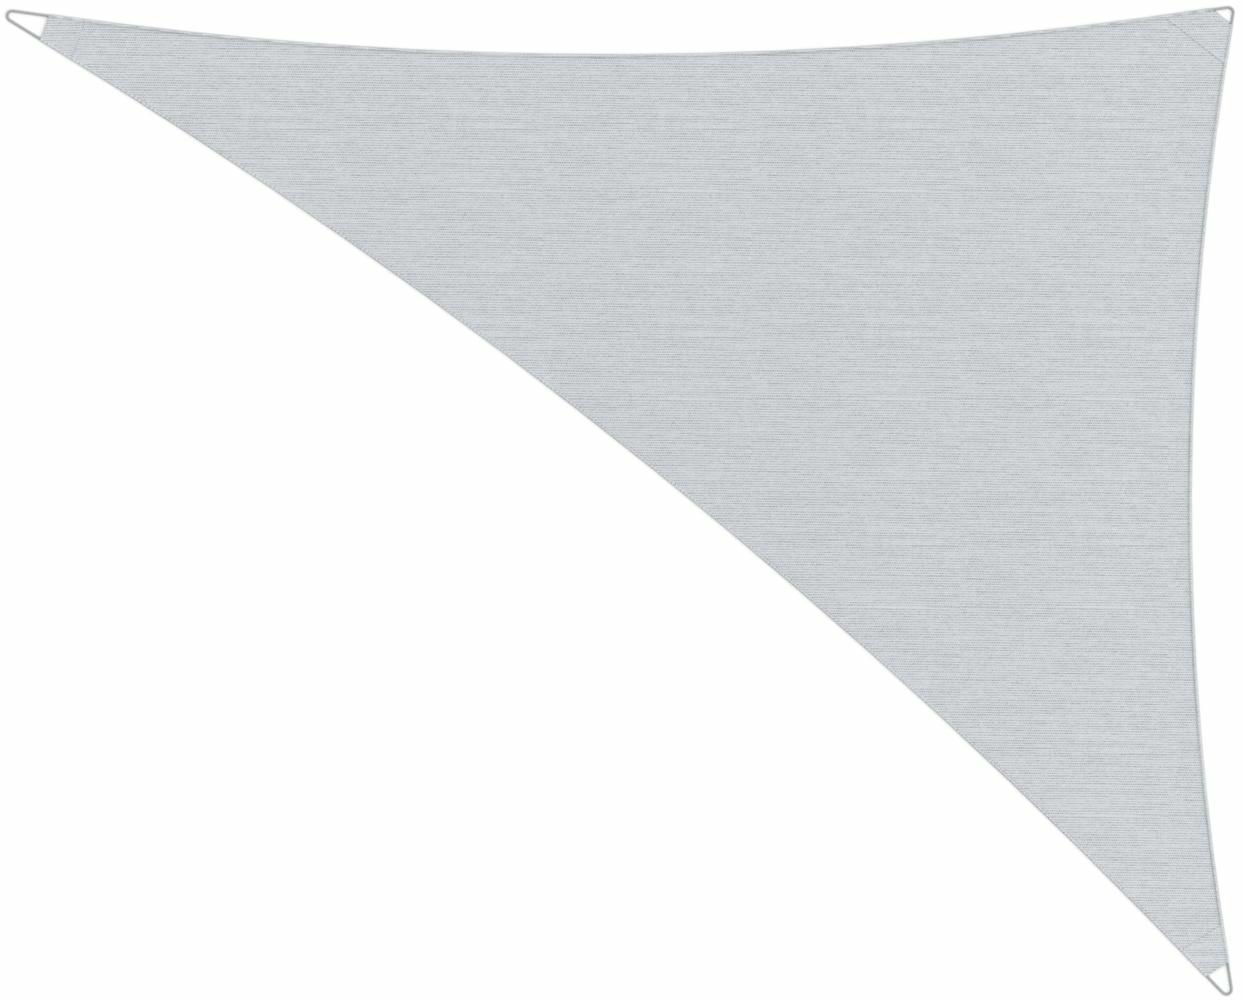 Ingenua shade sail Triangle 4 x 5 x 6,4 m, for outdoor use. Colour of the fabric shade sail Marble.